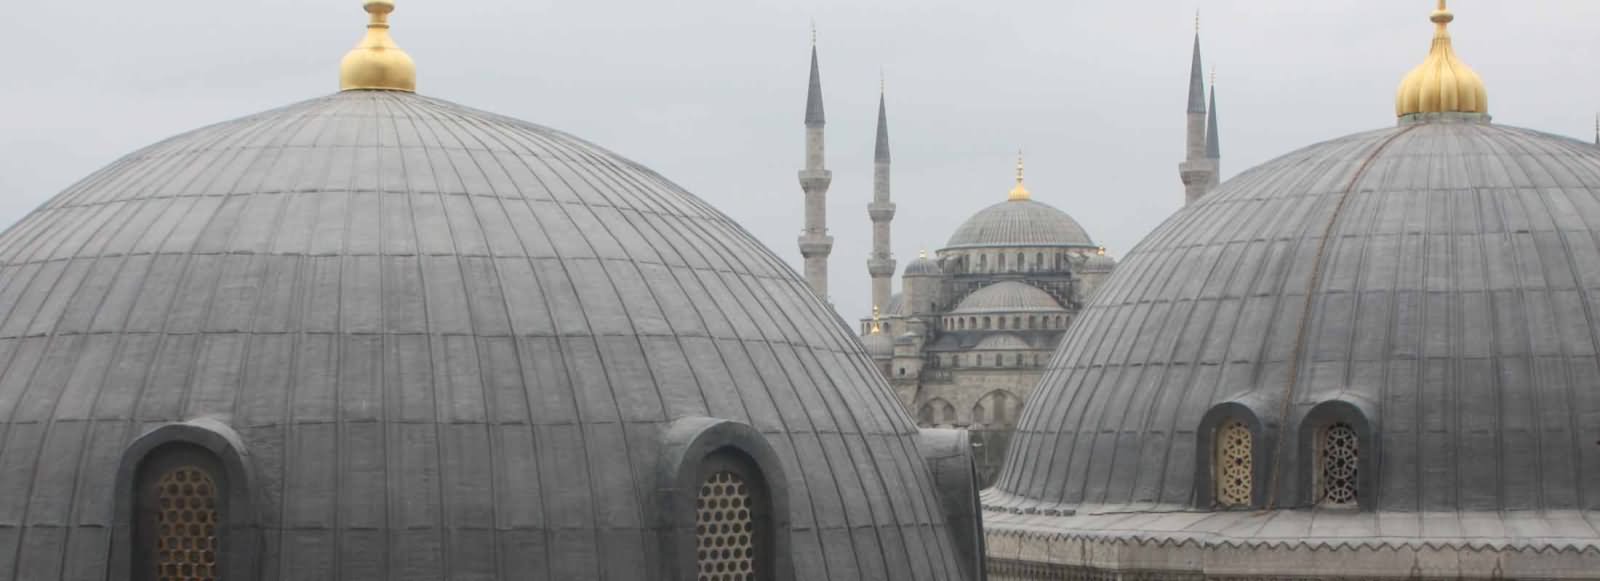 Closeup of The Dome Of The Blue Mosque Exterior View